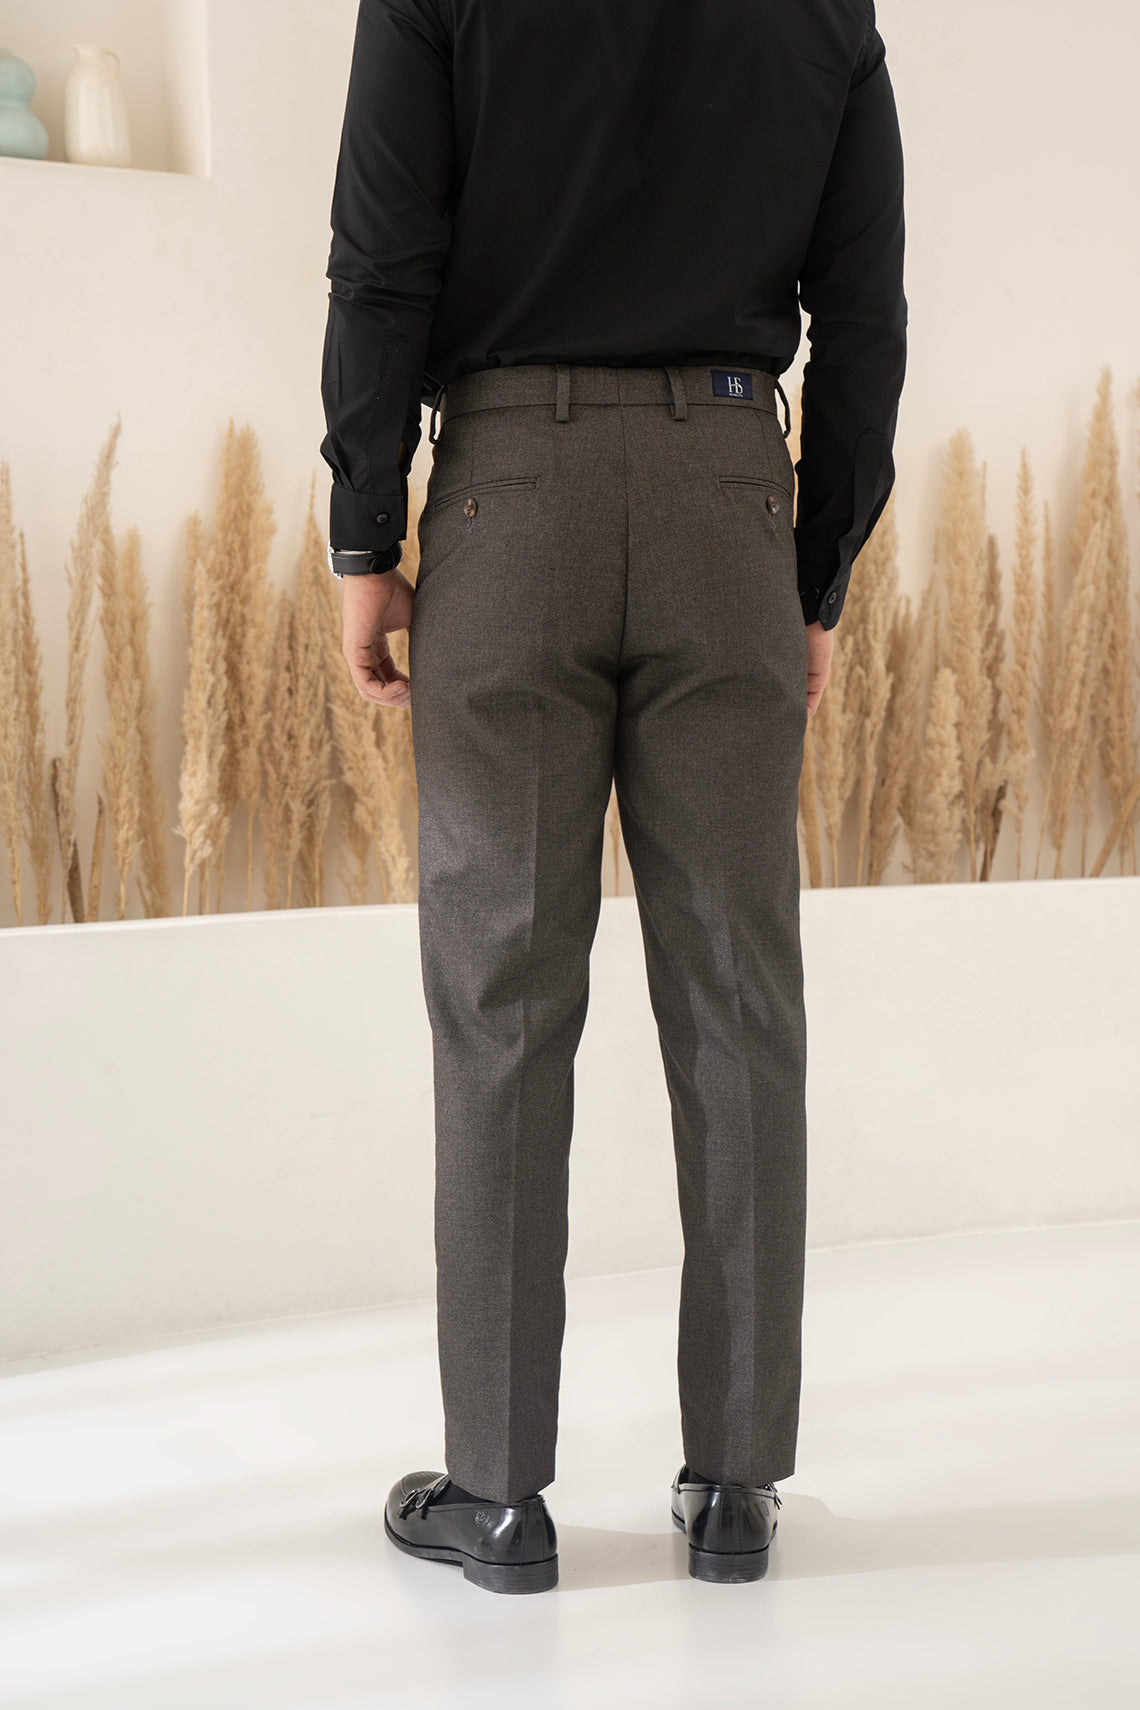 Angelico Grey moleskin trousers diagonally slim trousers for Man made of  stretch cotton grey